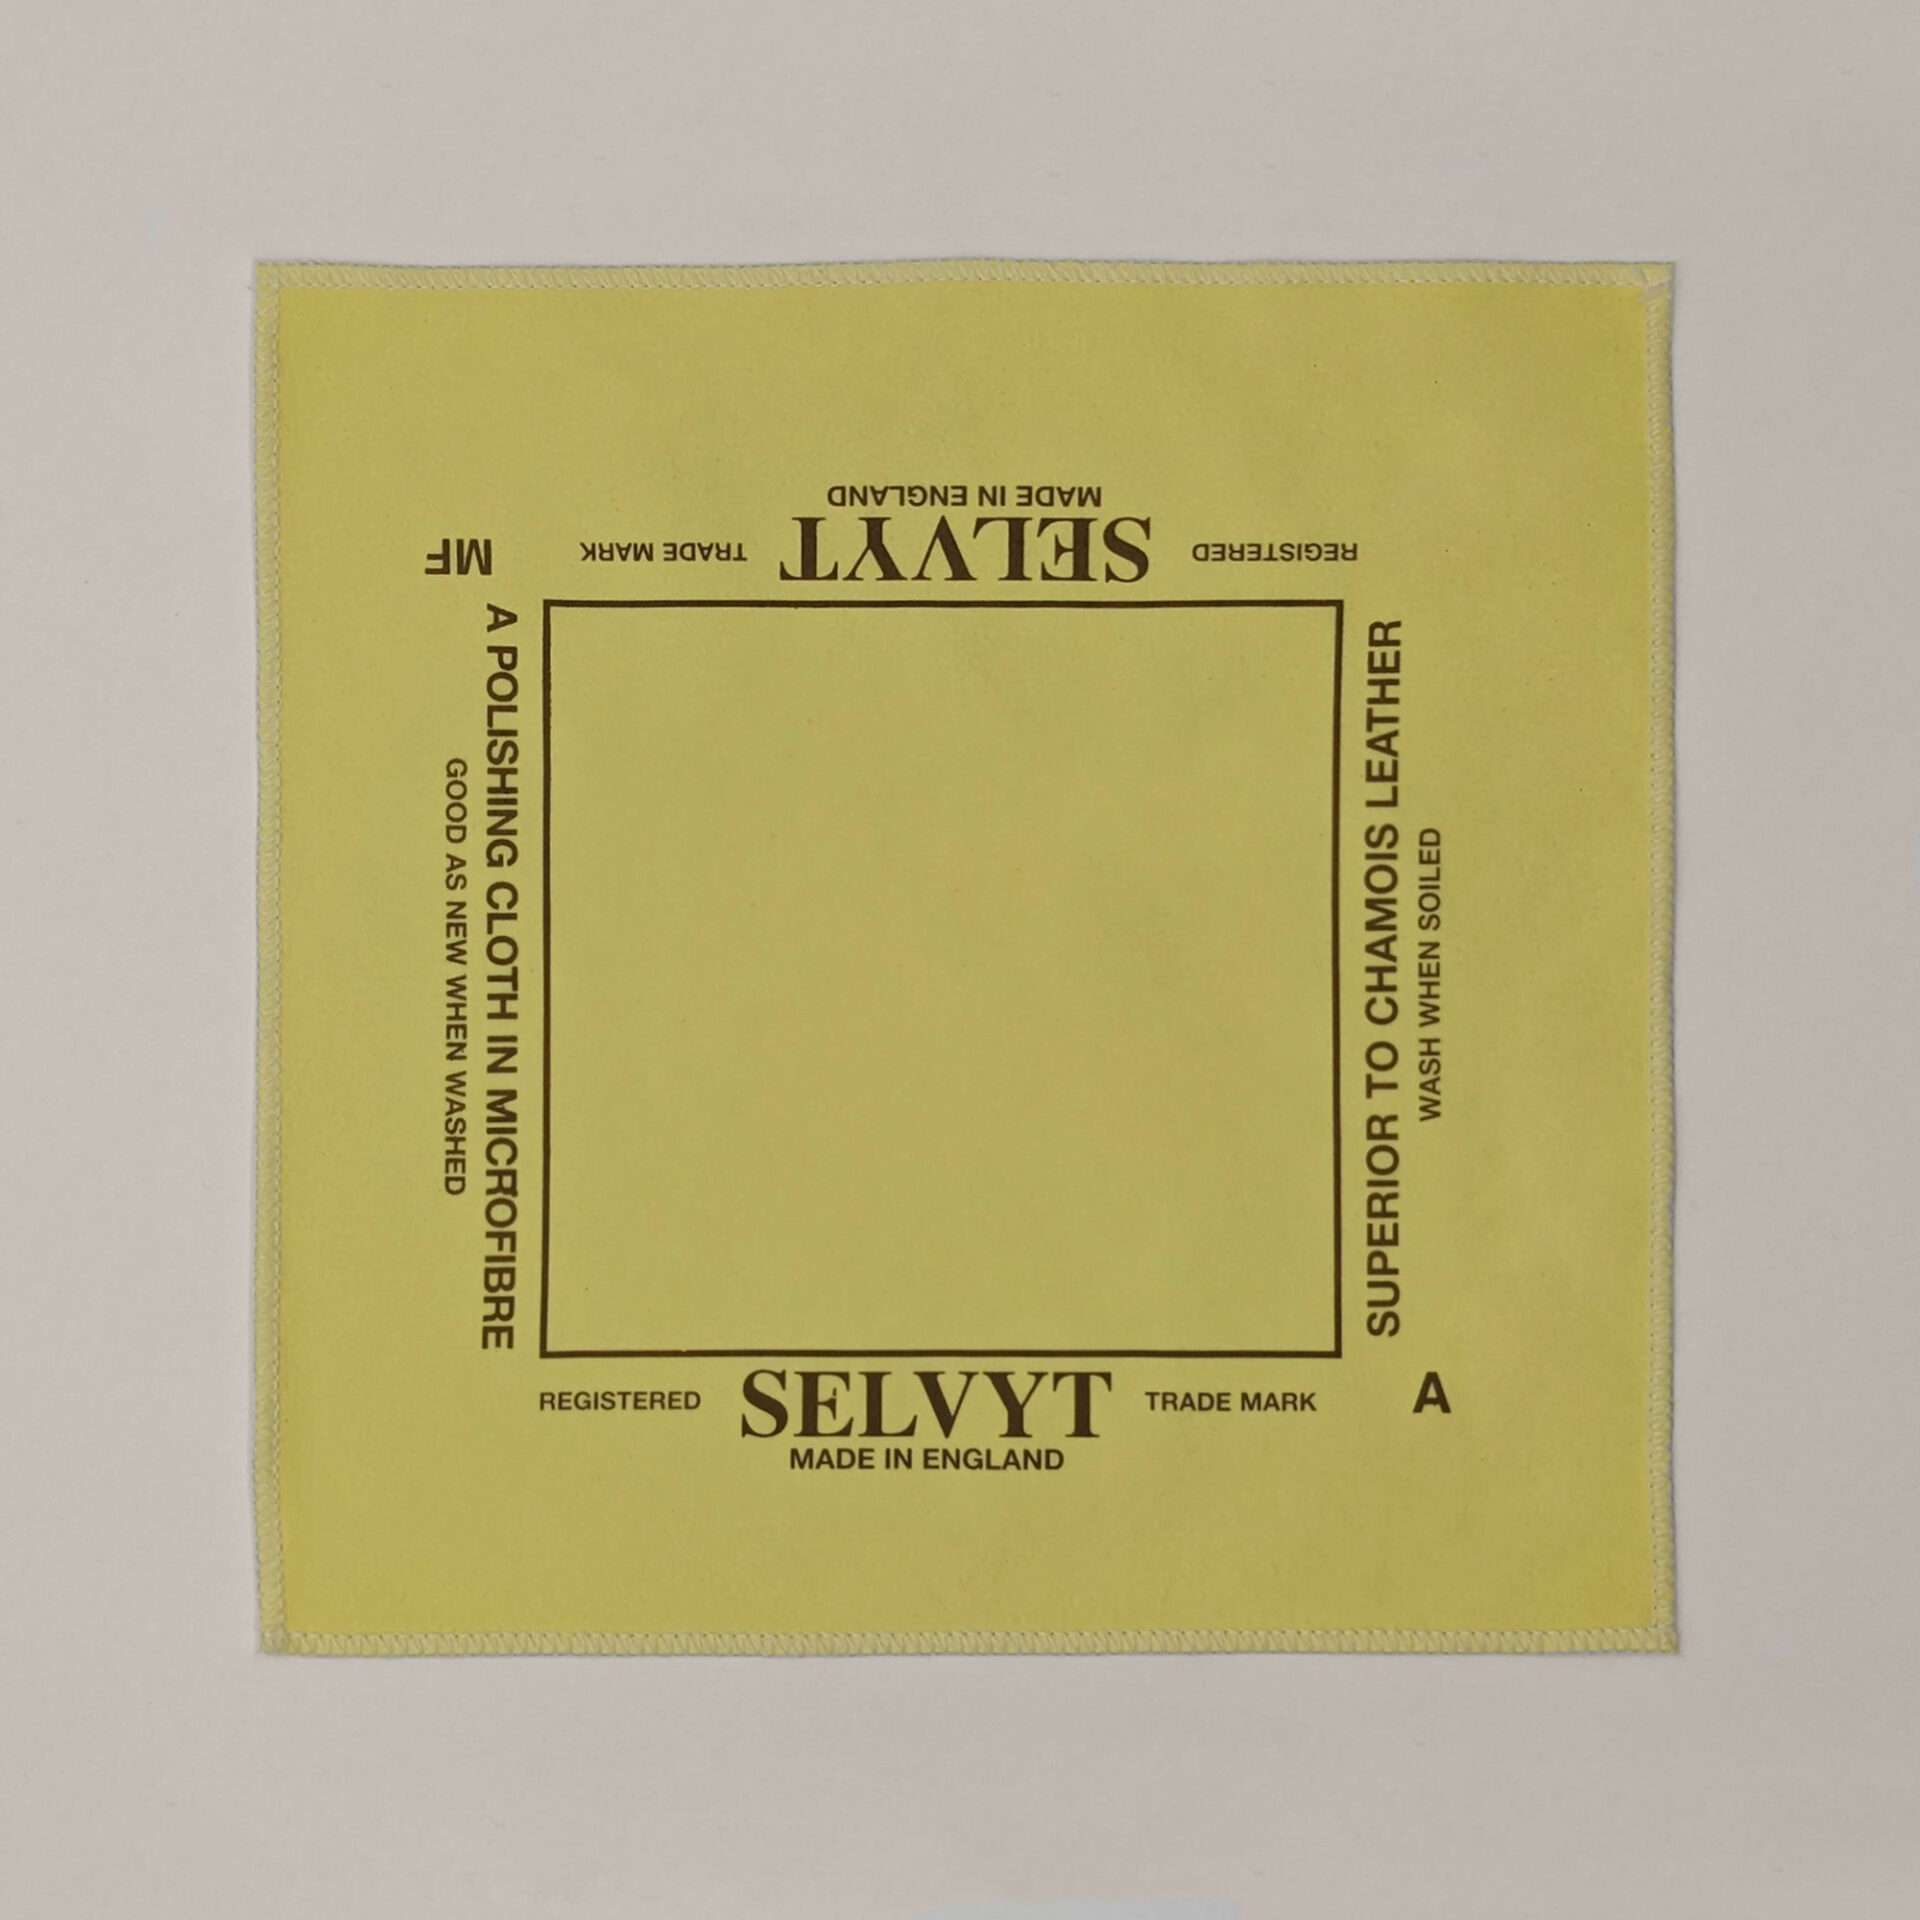 Selvyt Cloth - MF - Selvyt Cleaning Cloths